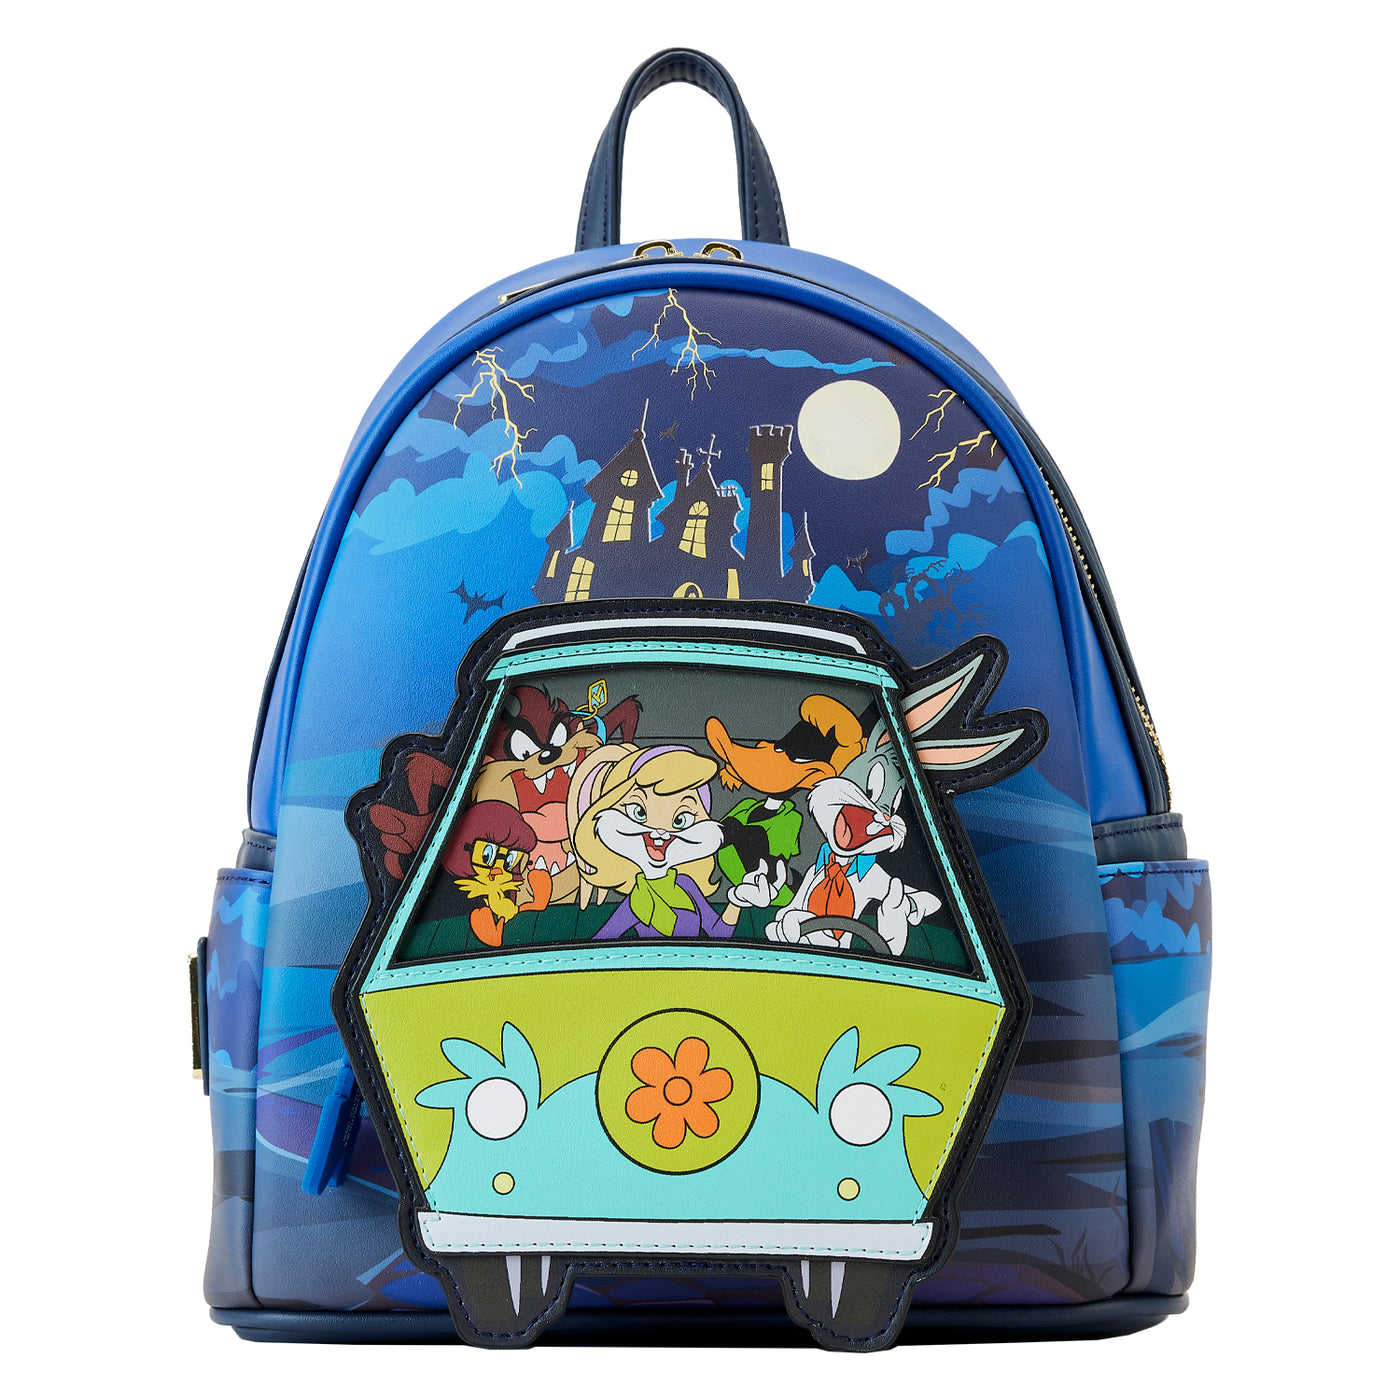 Warner Bros 100th Anniversary Looney Tunes Scooby Mash Up Glow in the Dark Mini Backpack